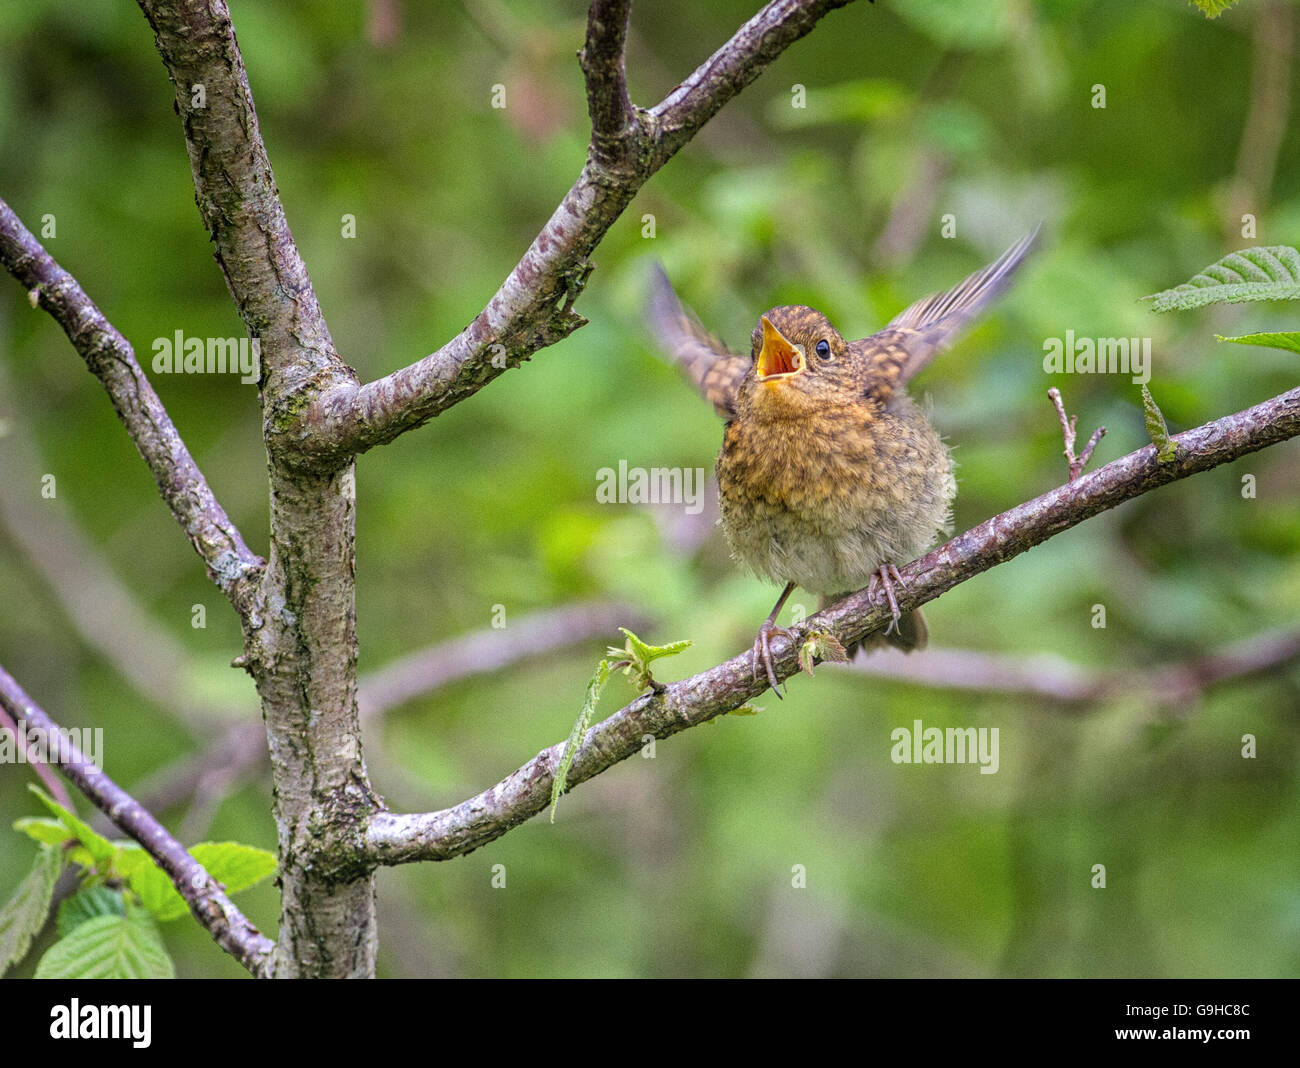 Juvenile robin begging for food by squarking and flapping for attention.  Fluttering her wings. Stock Photo